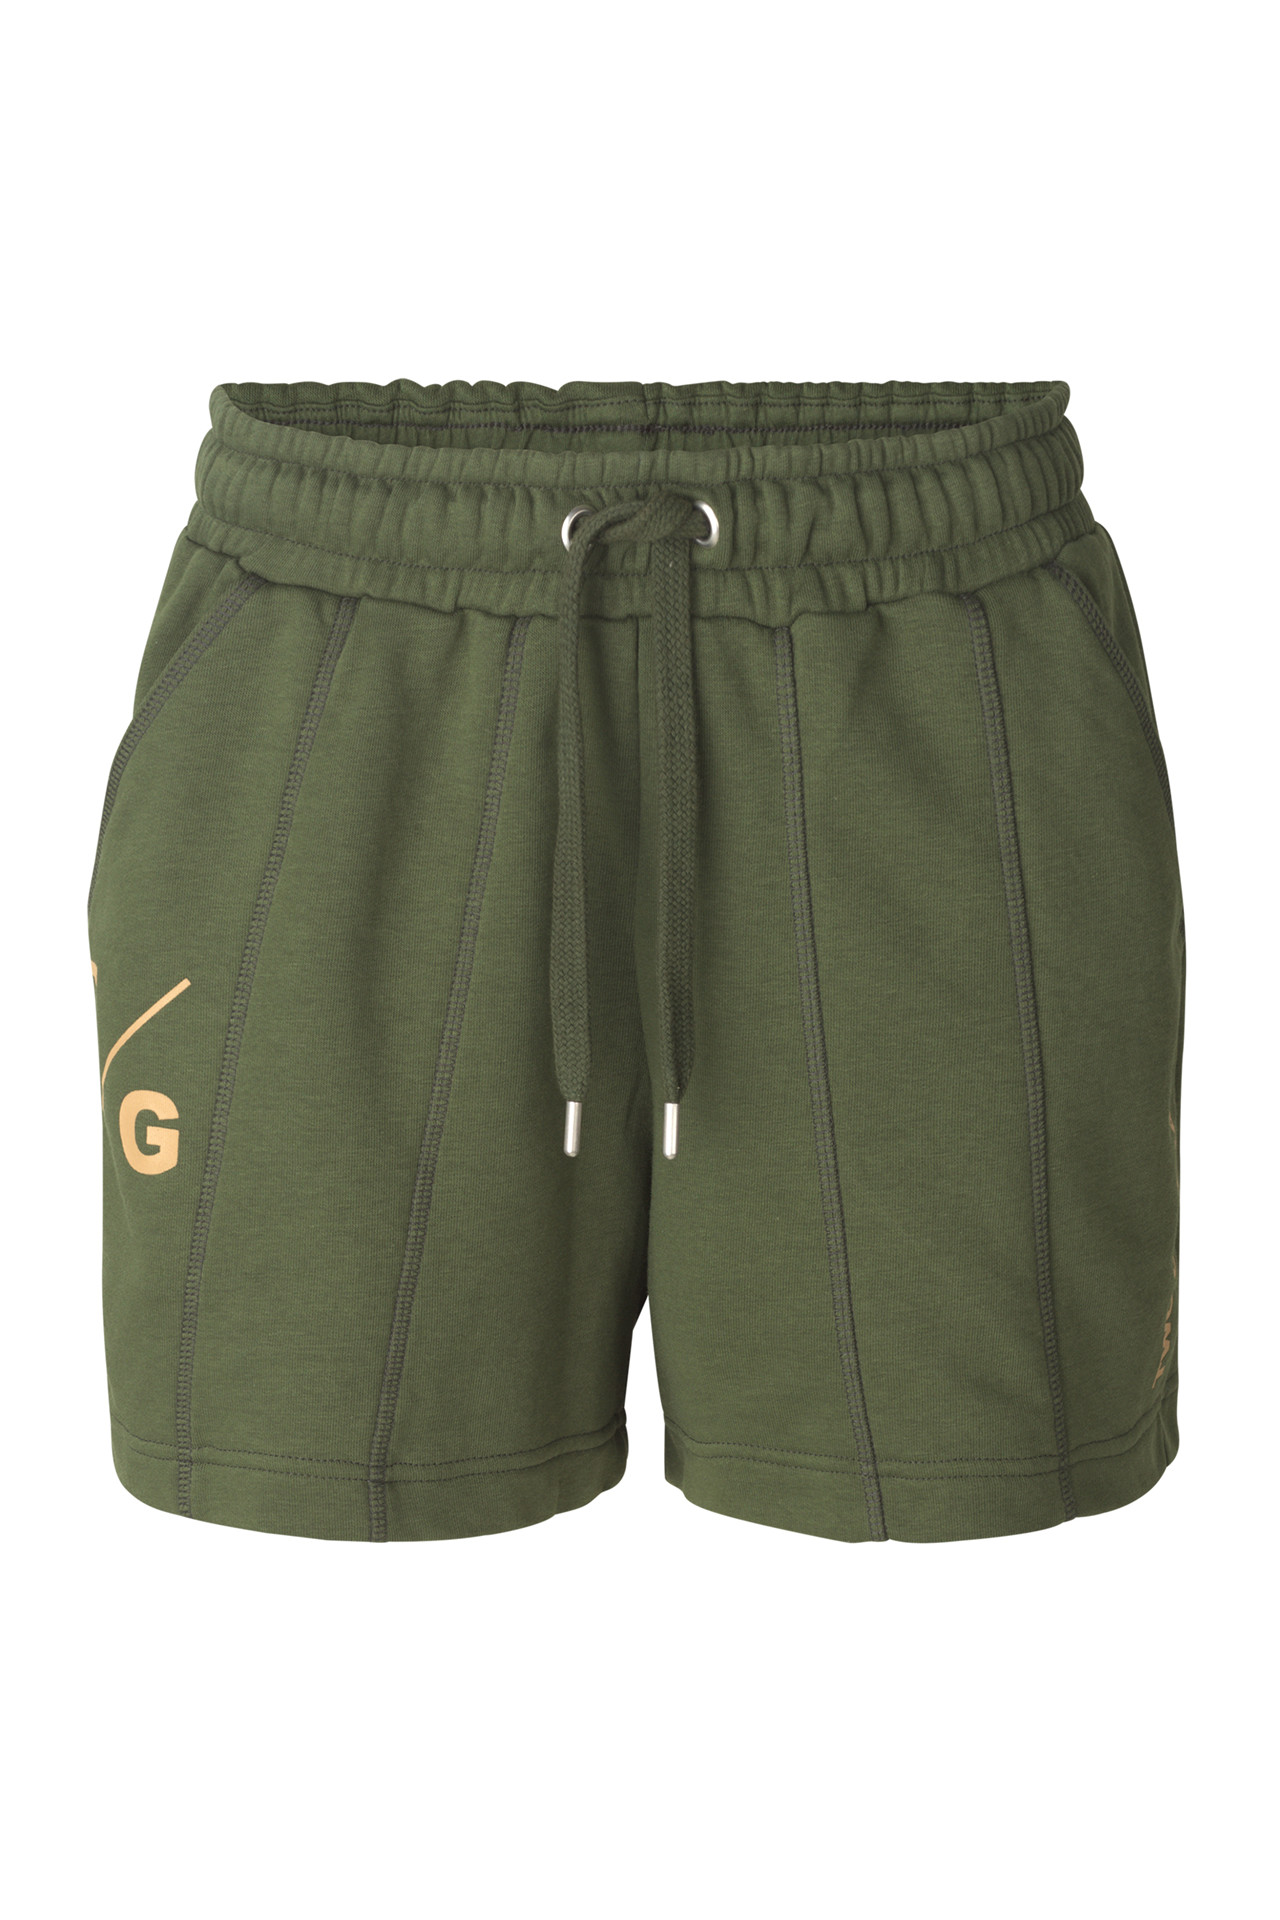 TWO GENERATIONS Tennessee shorts (DARK FOREST L)